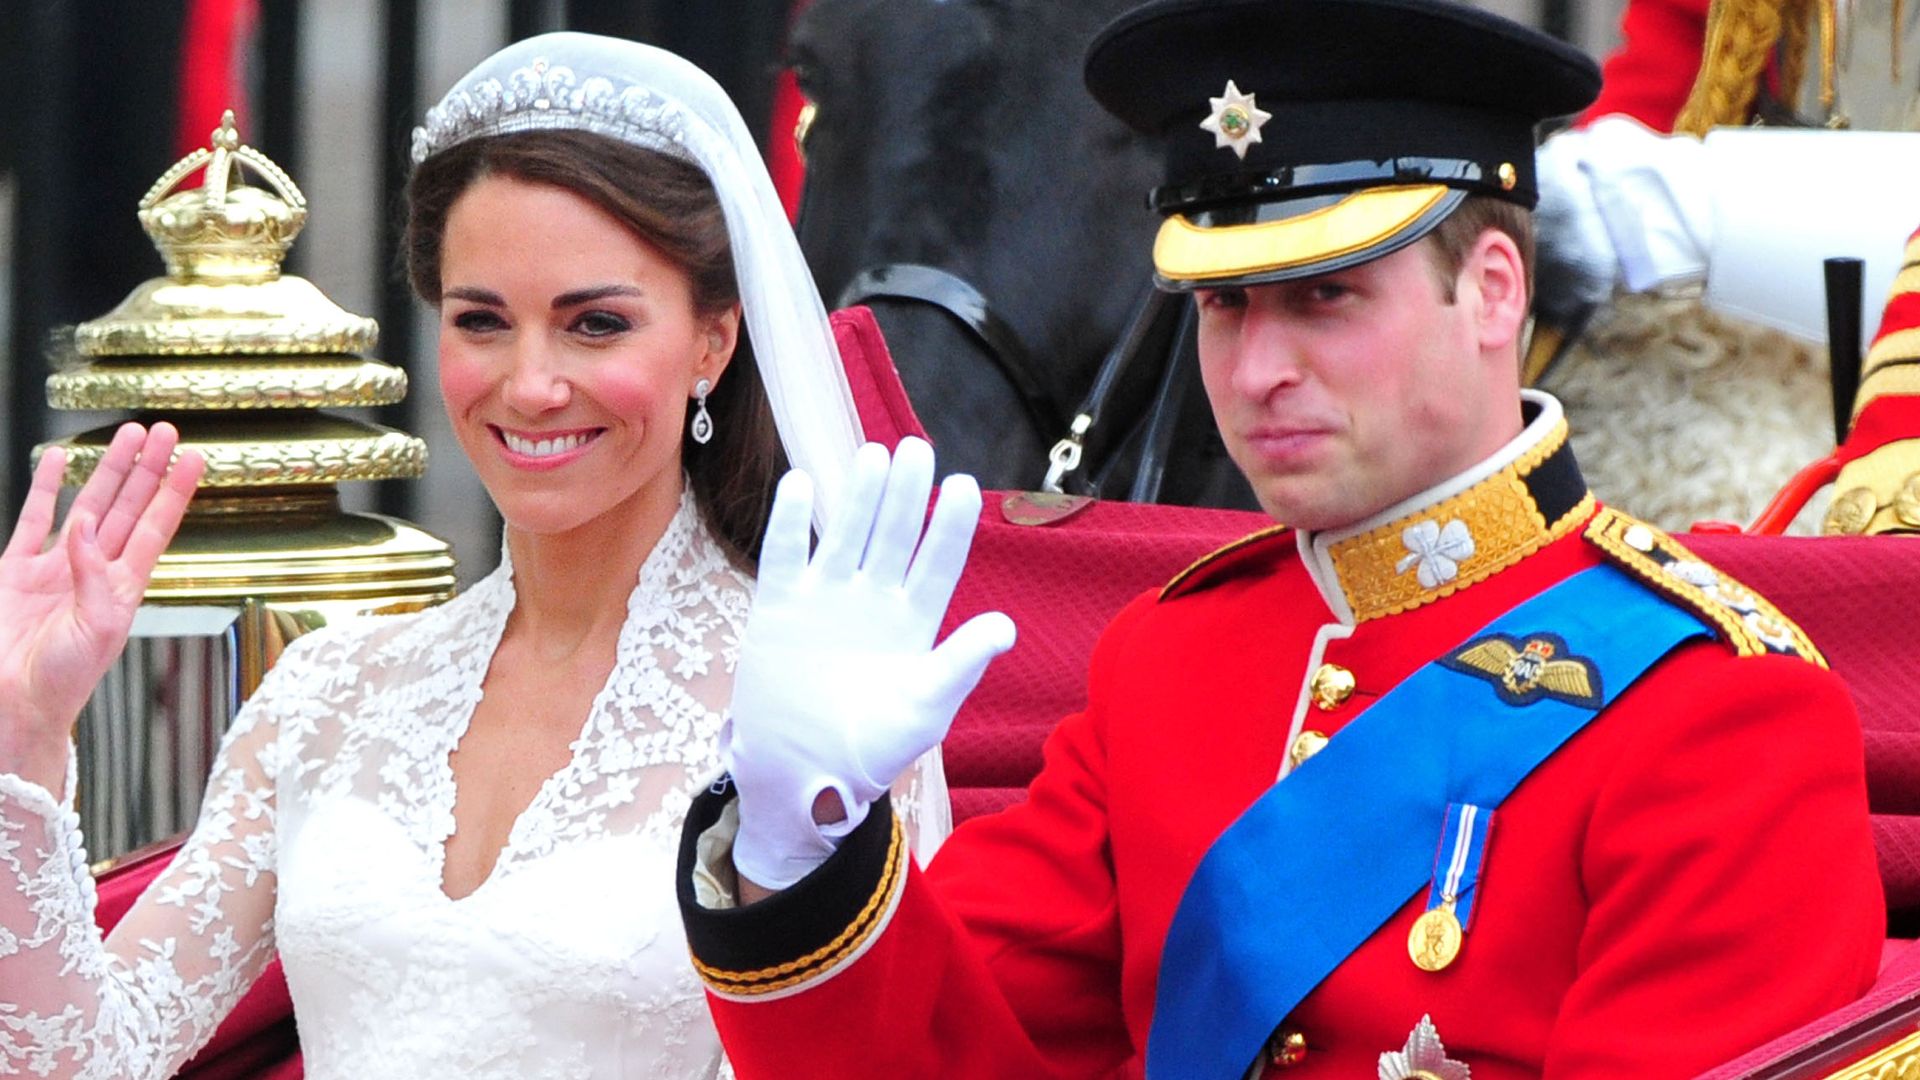 Prince William's rarely-pictured third wedding outfit following 'gloomy' appearance in red suit